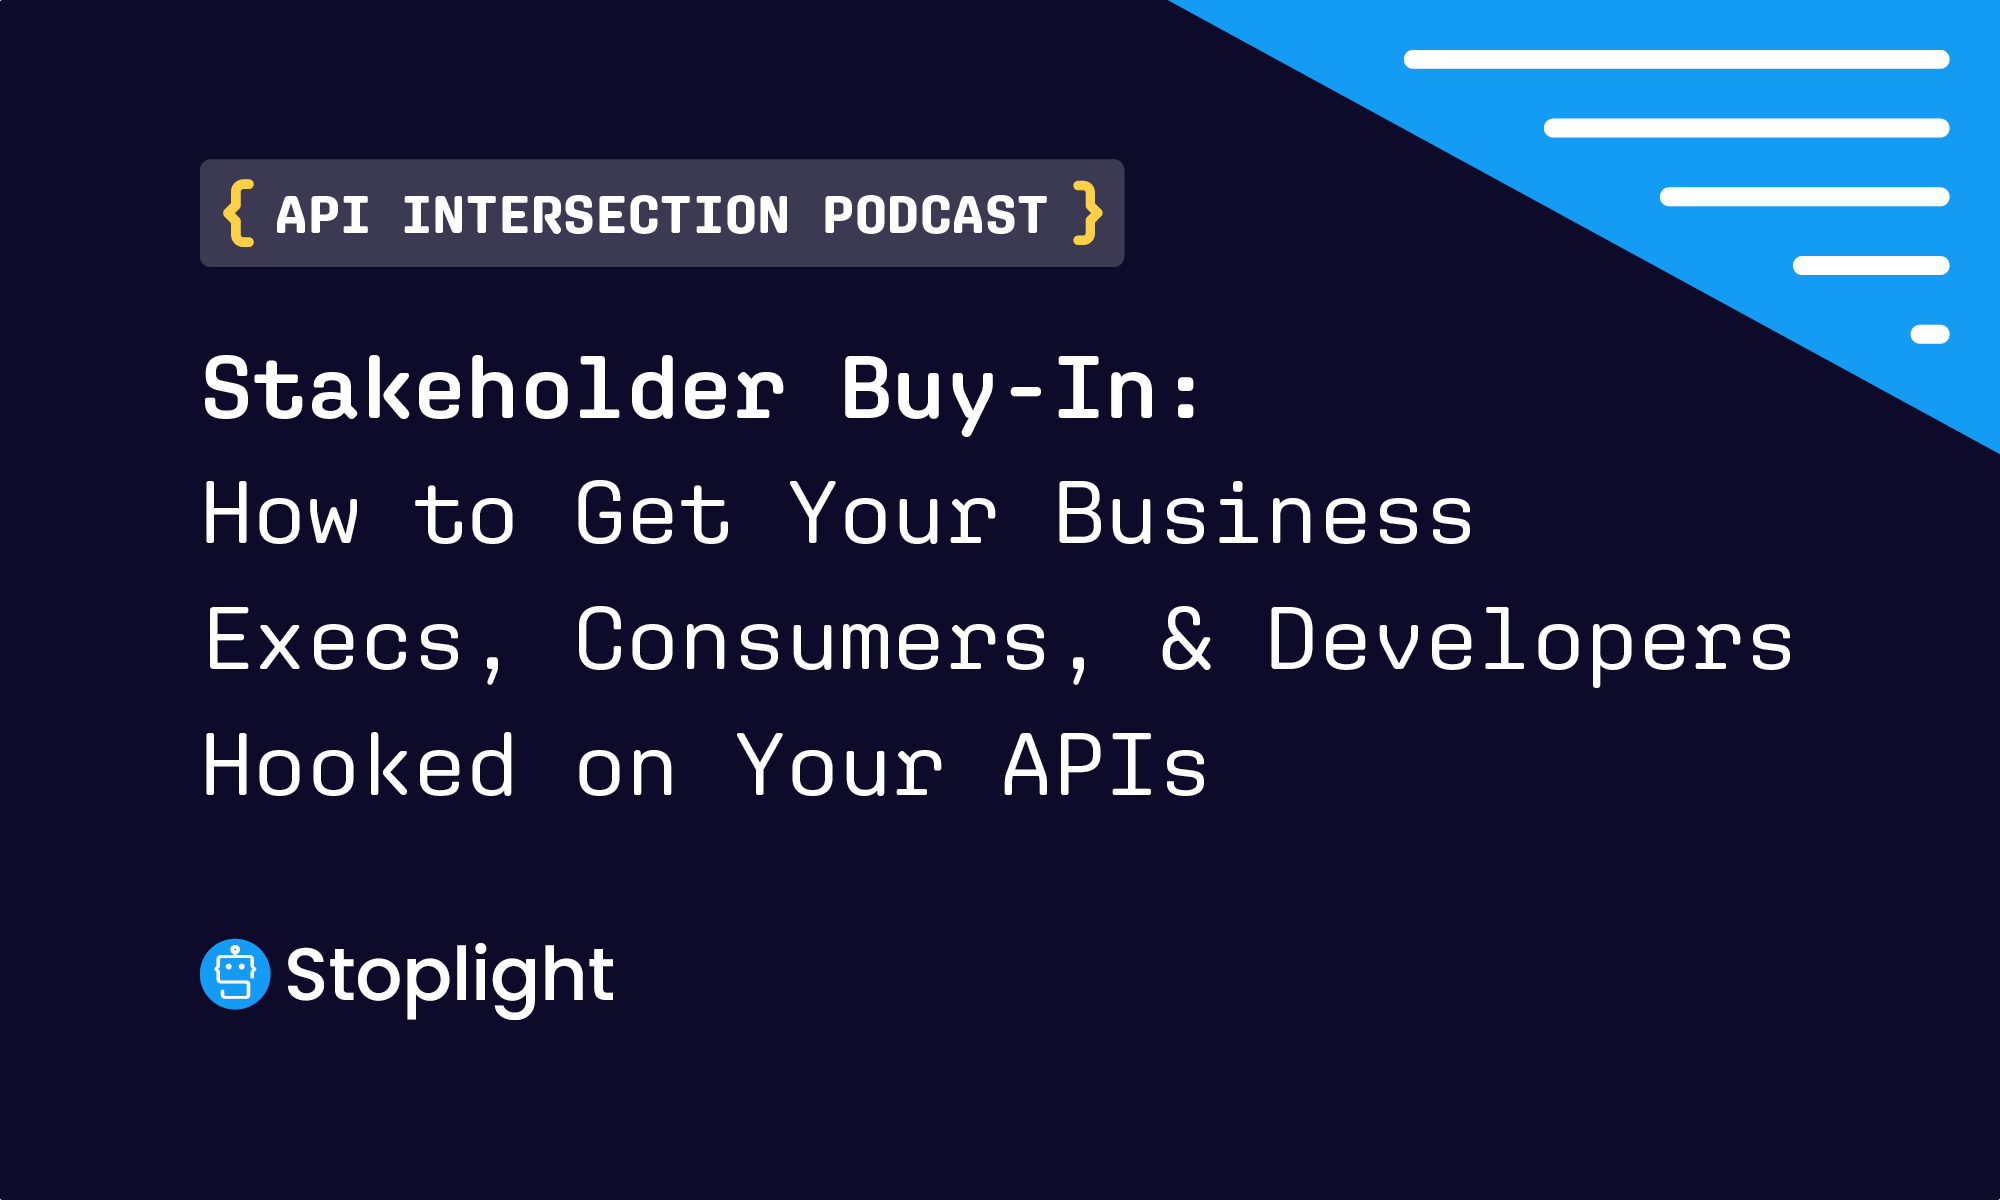 Stakeholder Buy-In: How to Get Your Business Execs, Consumers, and Developers Hooked on Your APIs